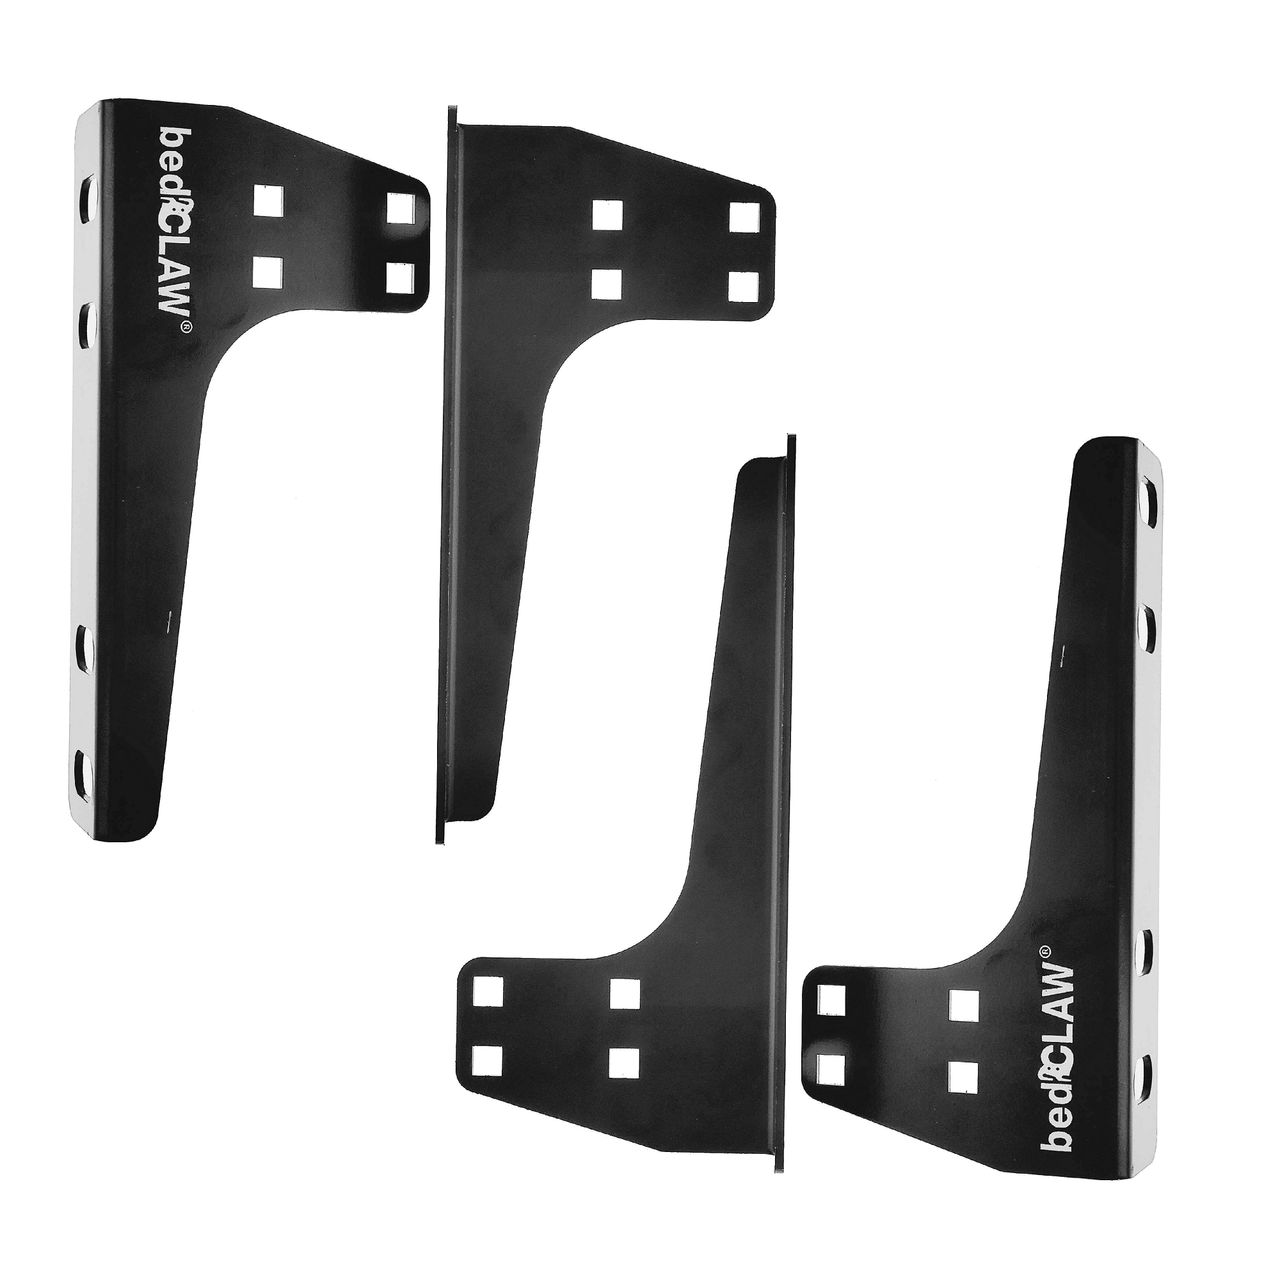 bedCLAW Set of 4 Attachment Brackets for Trundles, Top Springs, Bunks, Day Beds